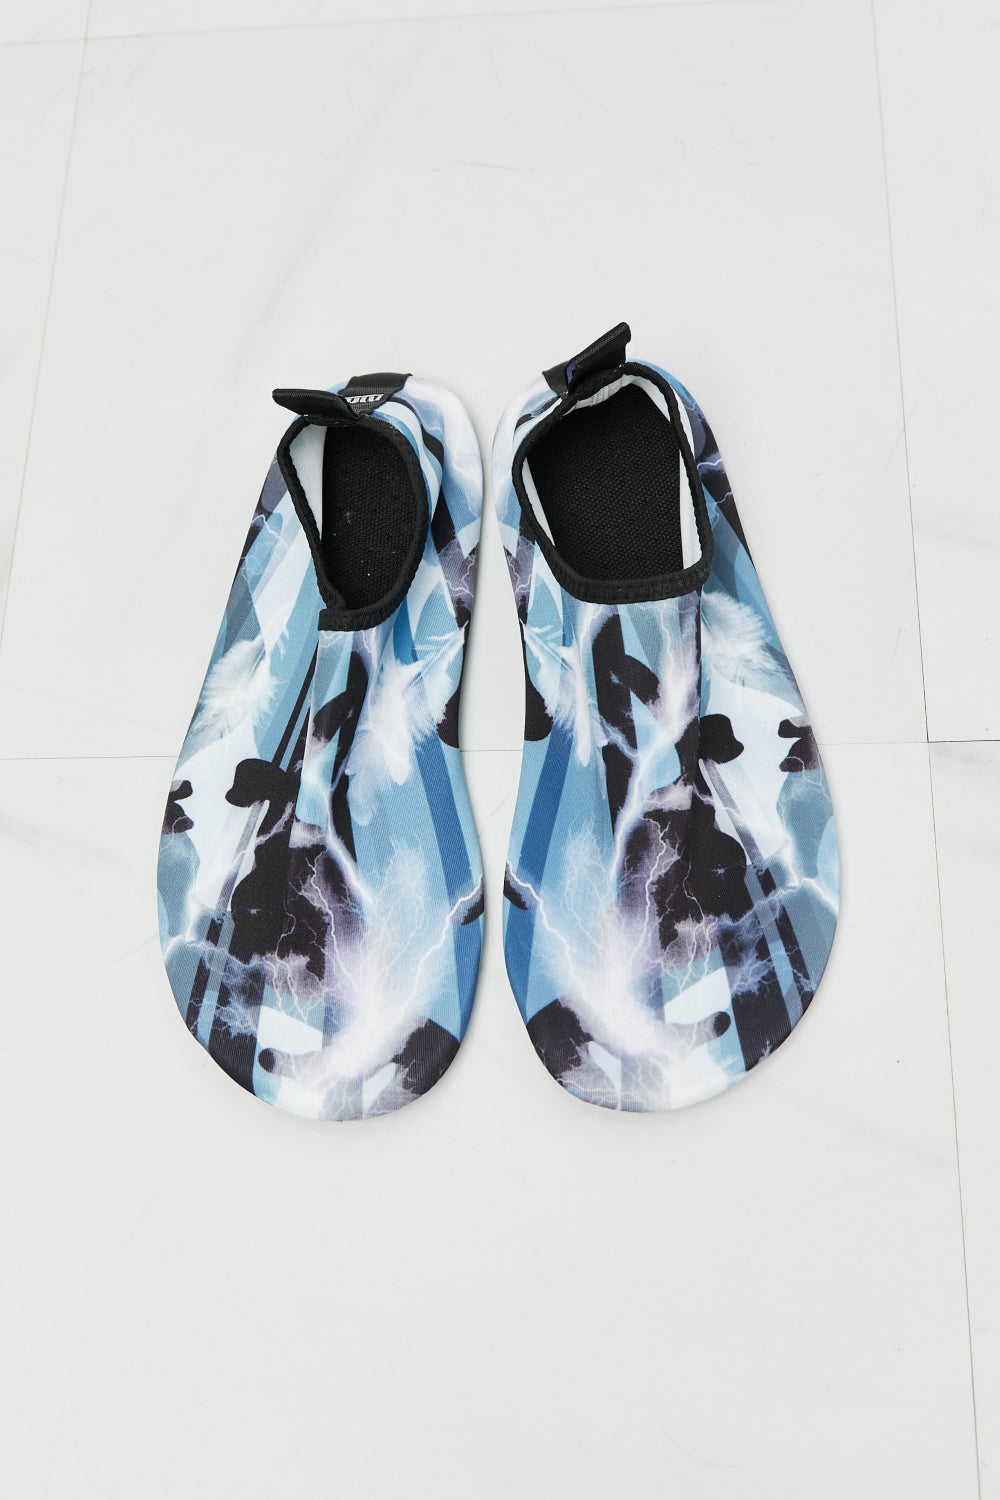 MMshoes On The Shore Water Shoes in Multi - Online Only